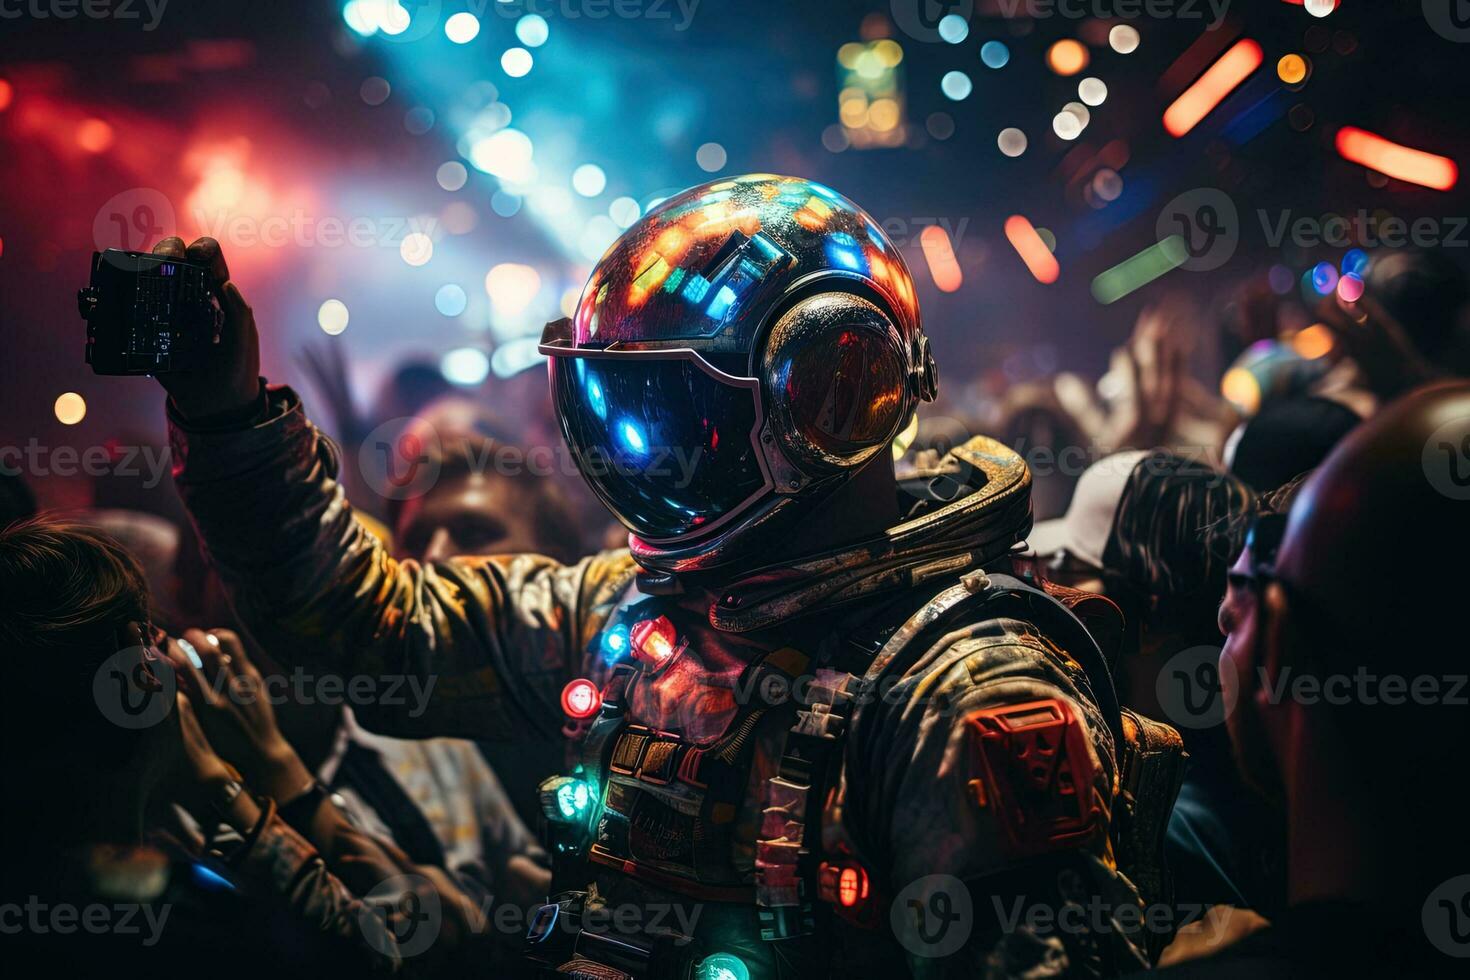 Astronaut in a space suit with garland and helmet at a rave club with a glass of cocktail among a dancing crowd photo